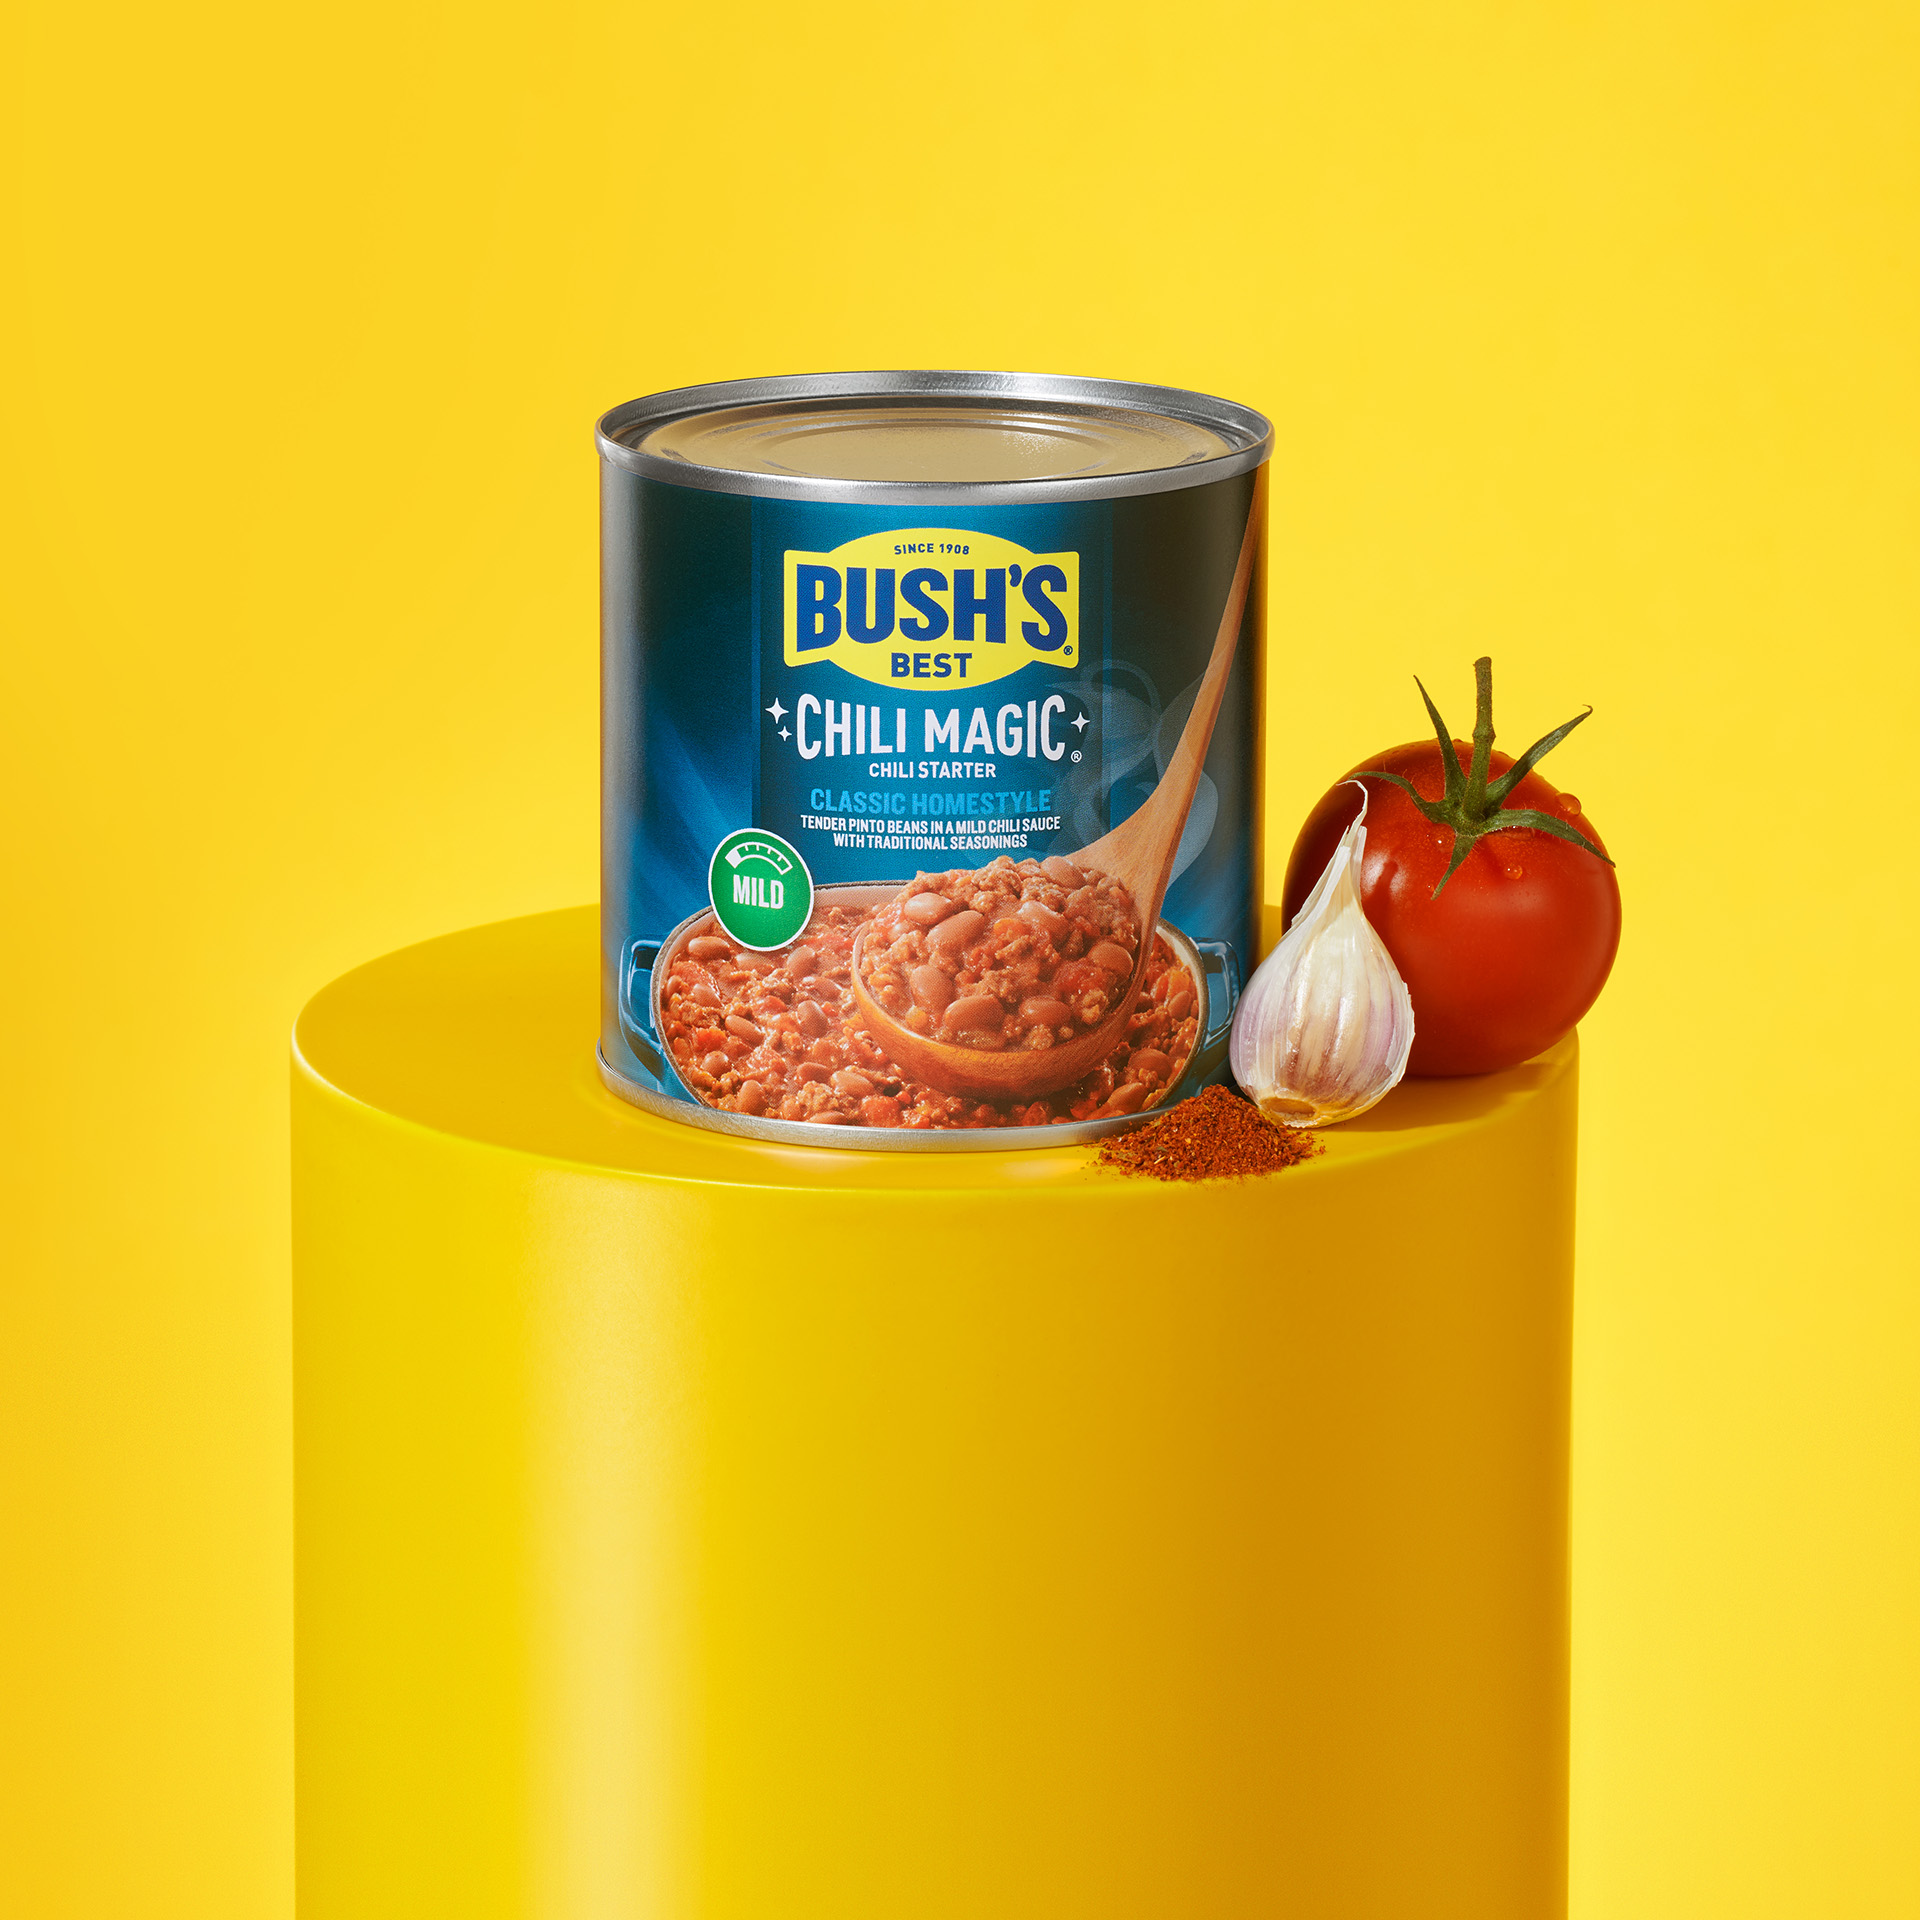 Can of Bush’s Chili Magic Classic Homestyle on a pedestal with a tomato, garlic clove and spices.